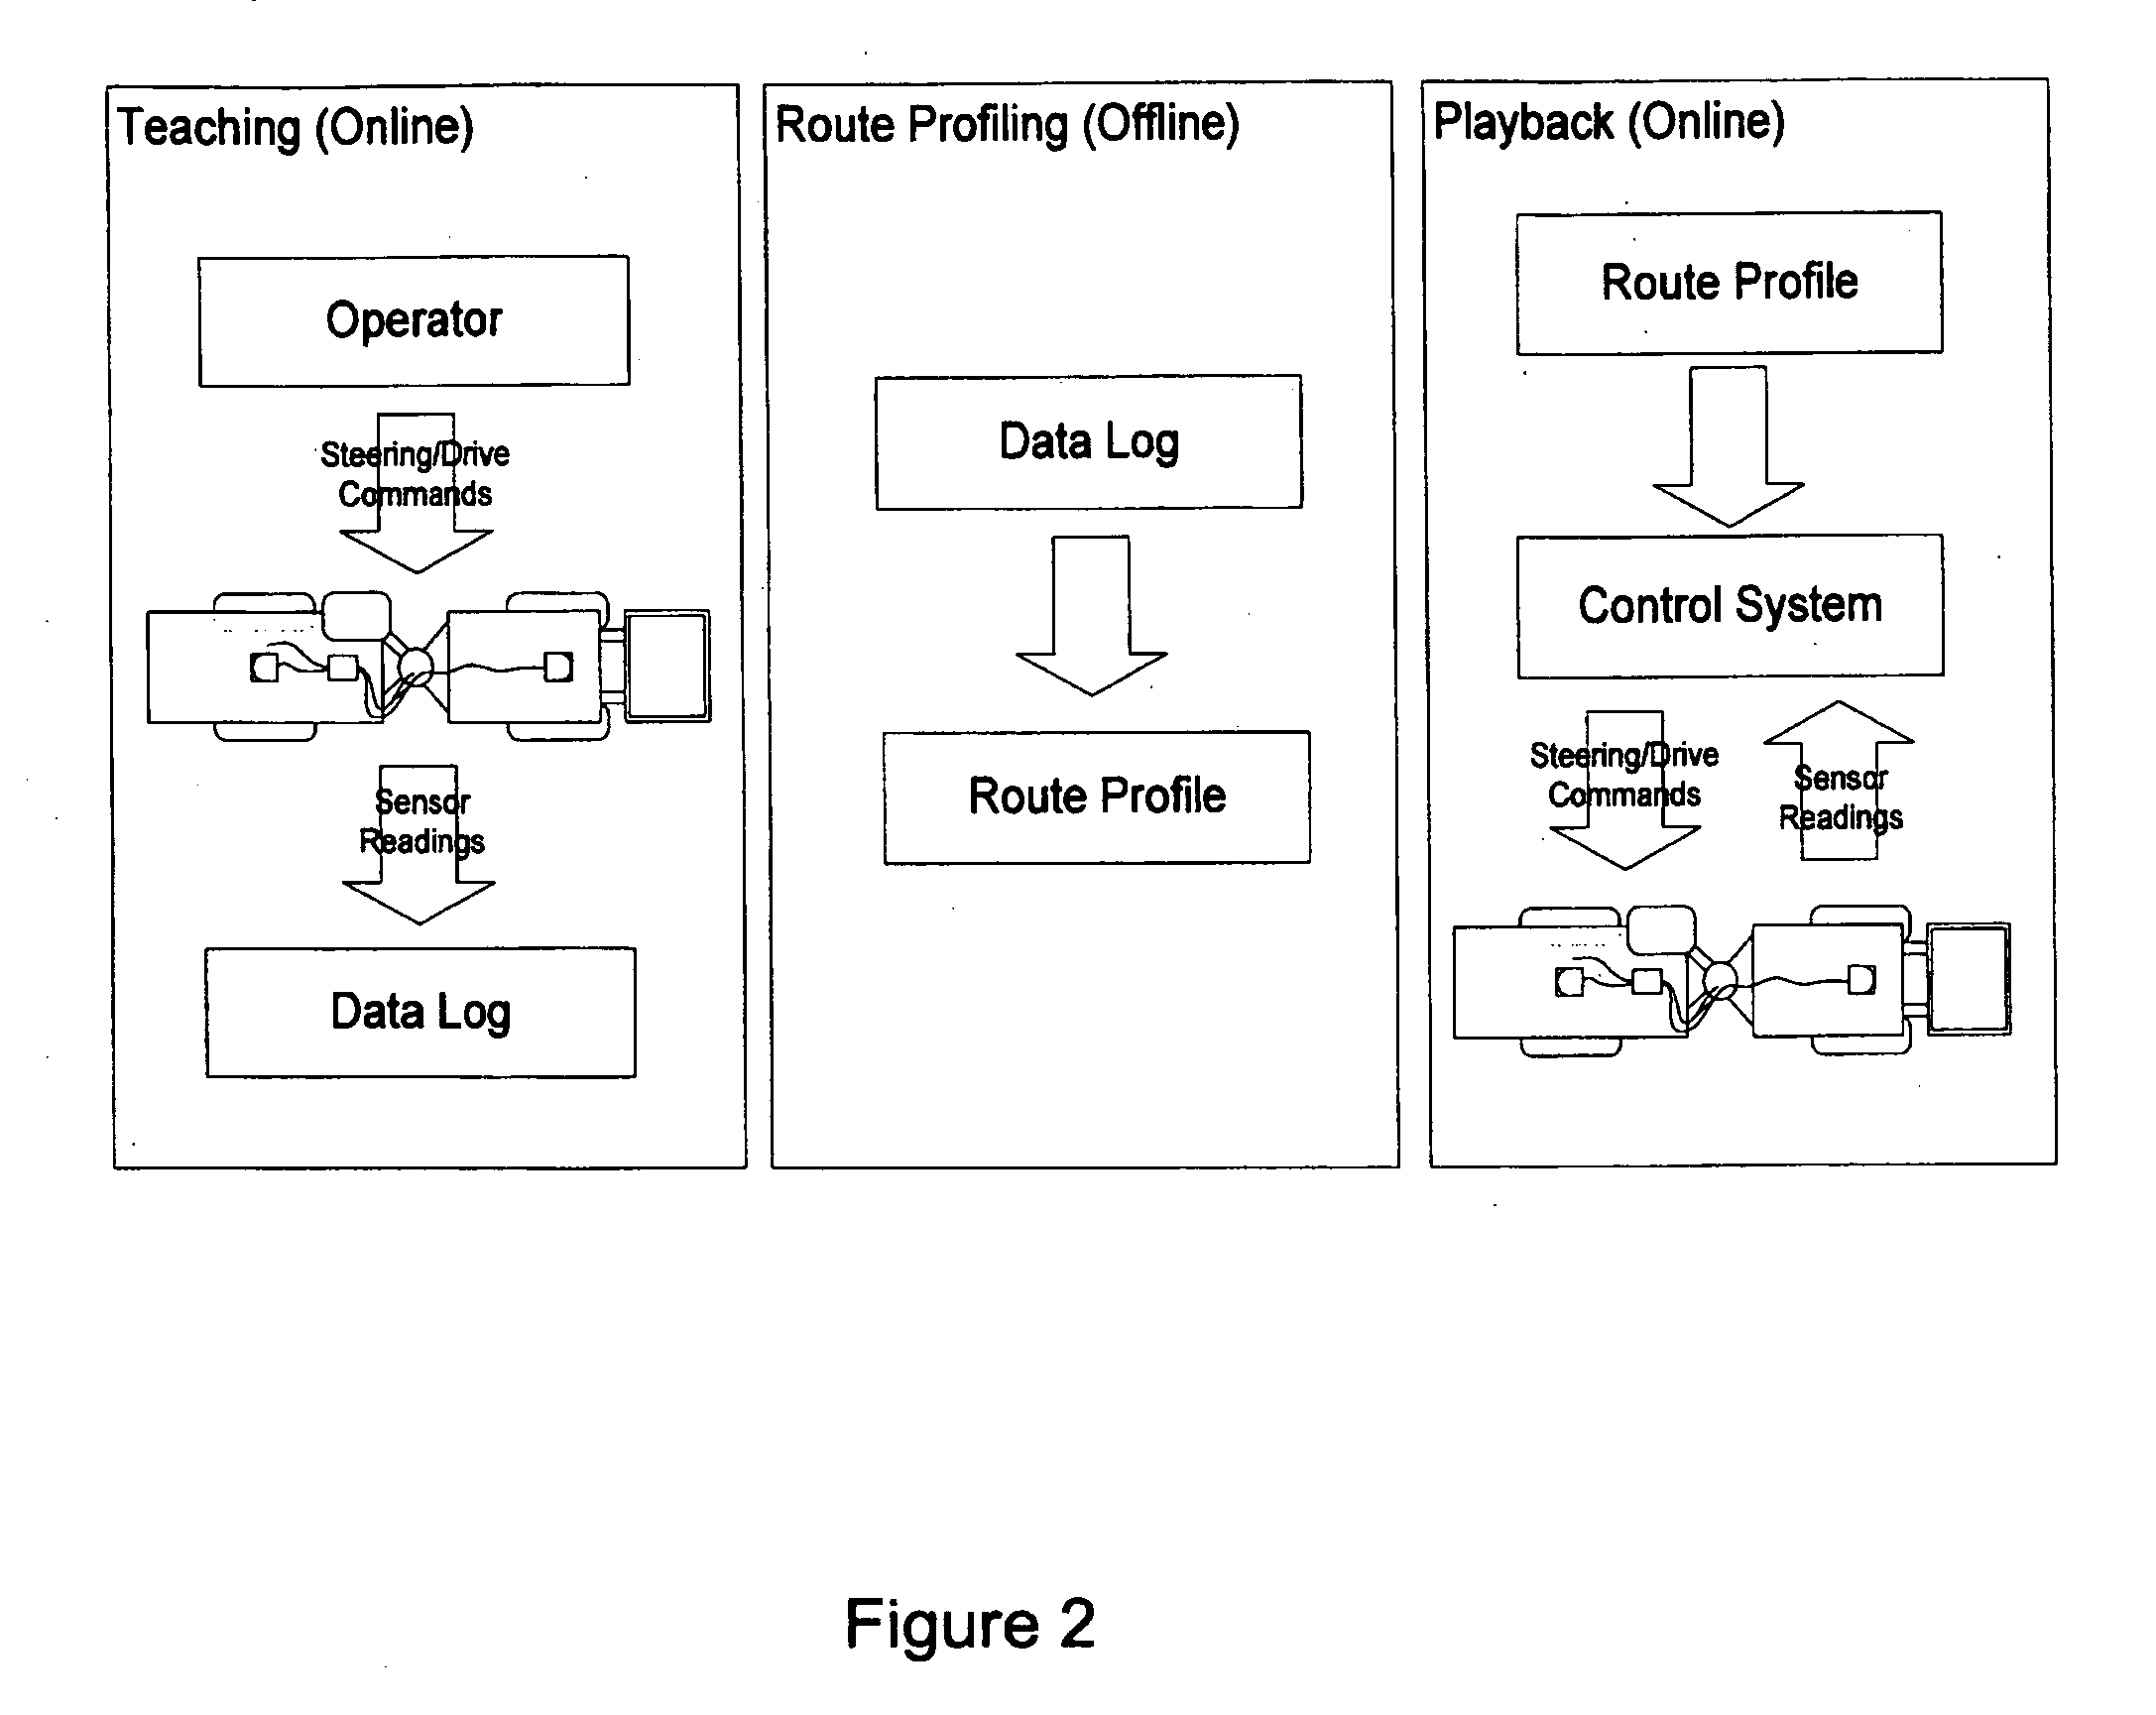 Guidance, Navigation, and Control System for a Vehicle